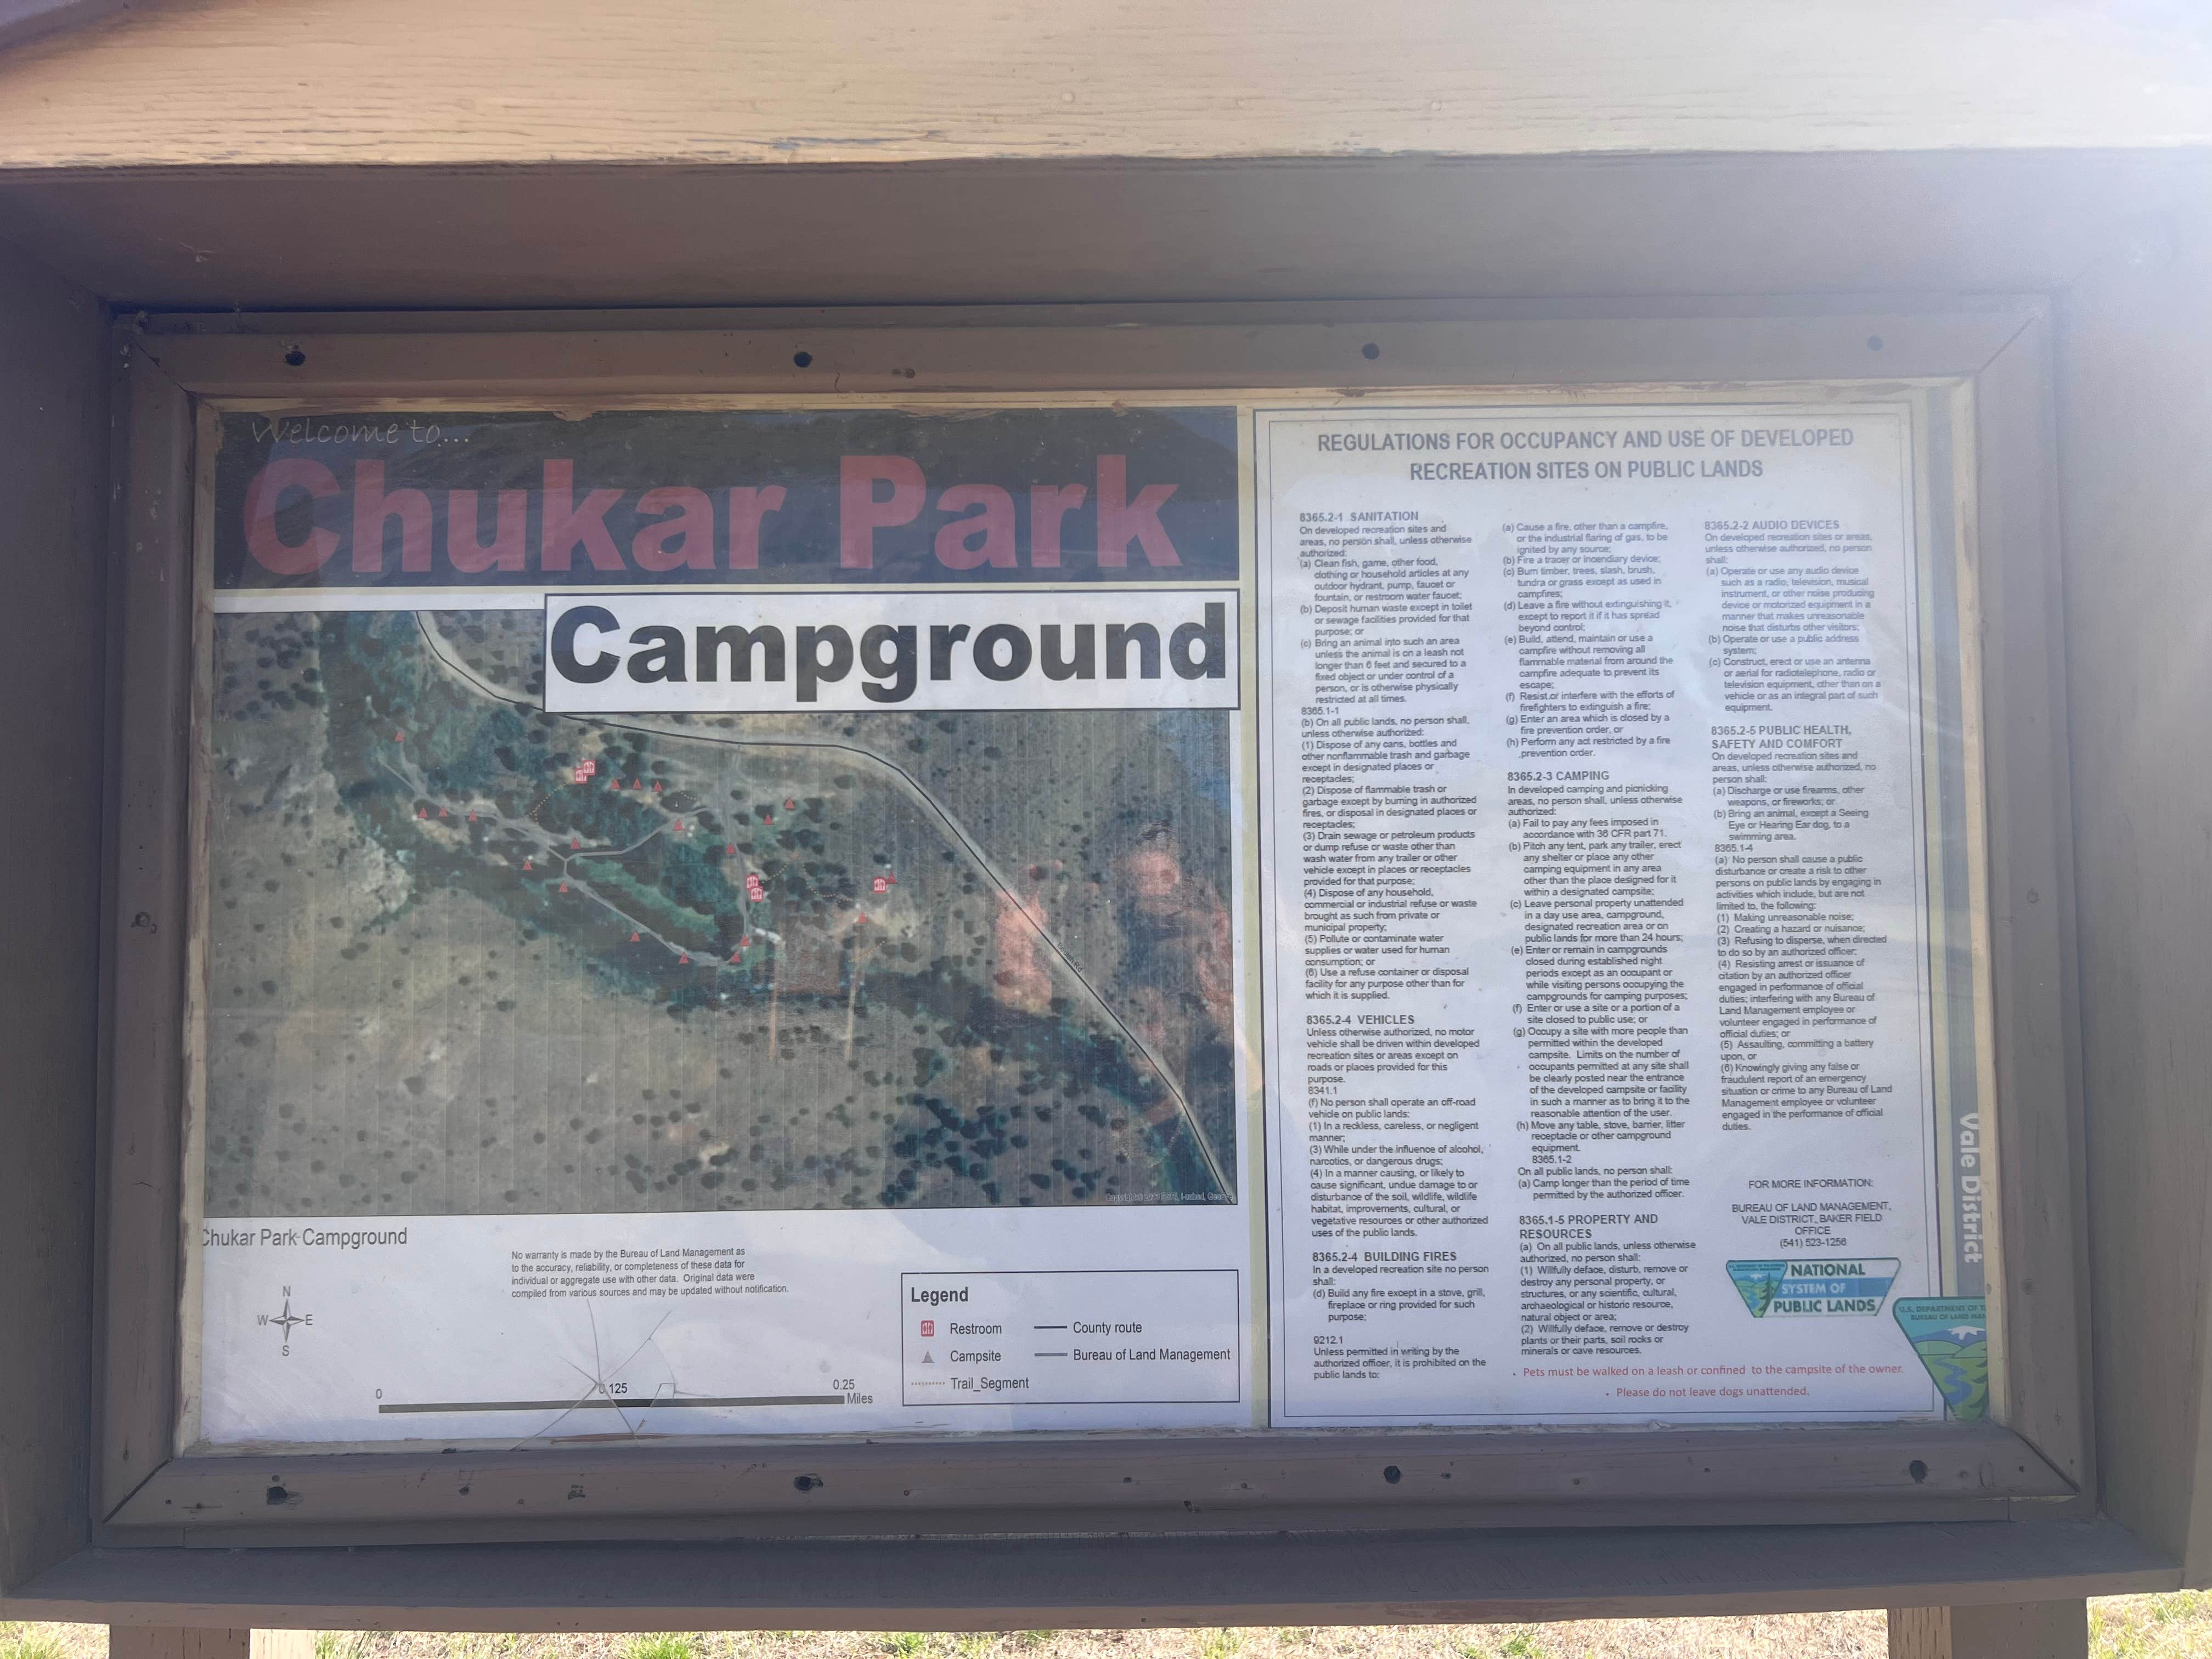 Camper submitted image from Chukar Park Campground - 5